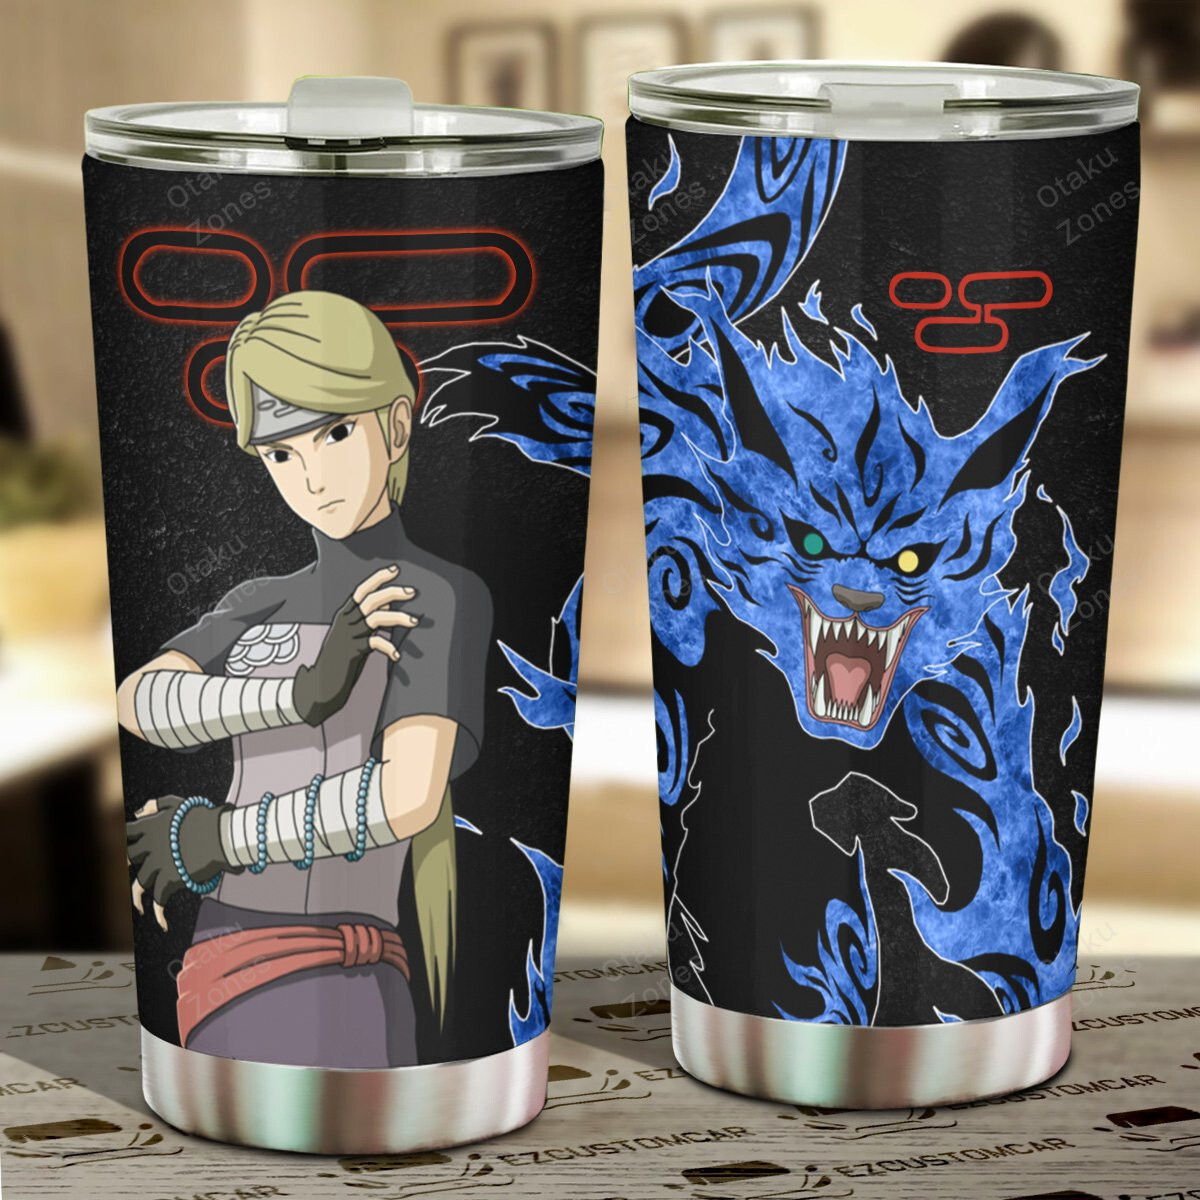 Go ahead and order your new tumbler now! 59